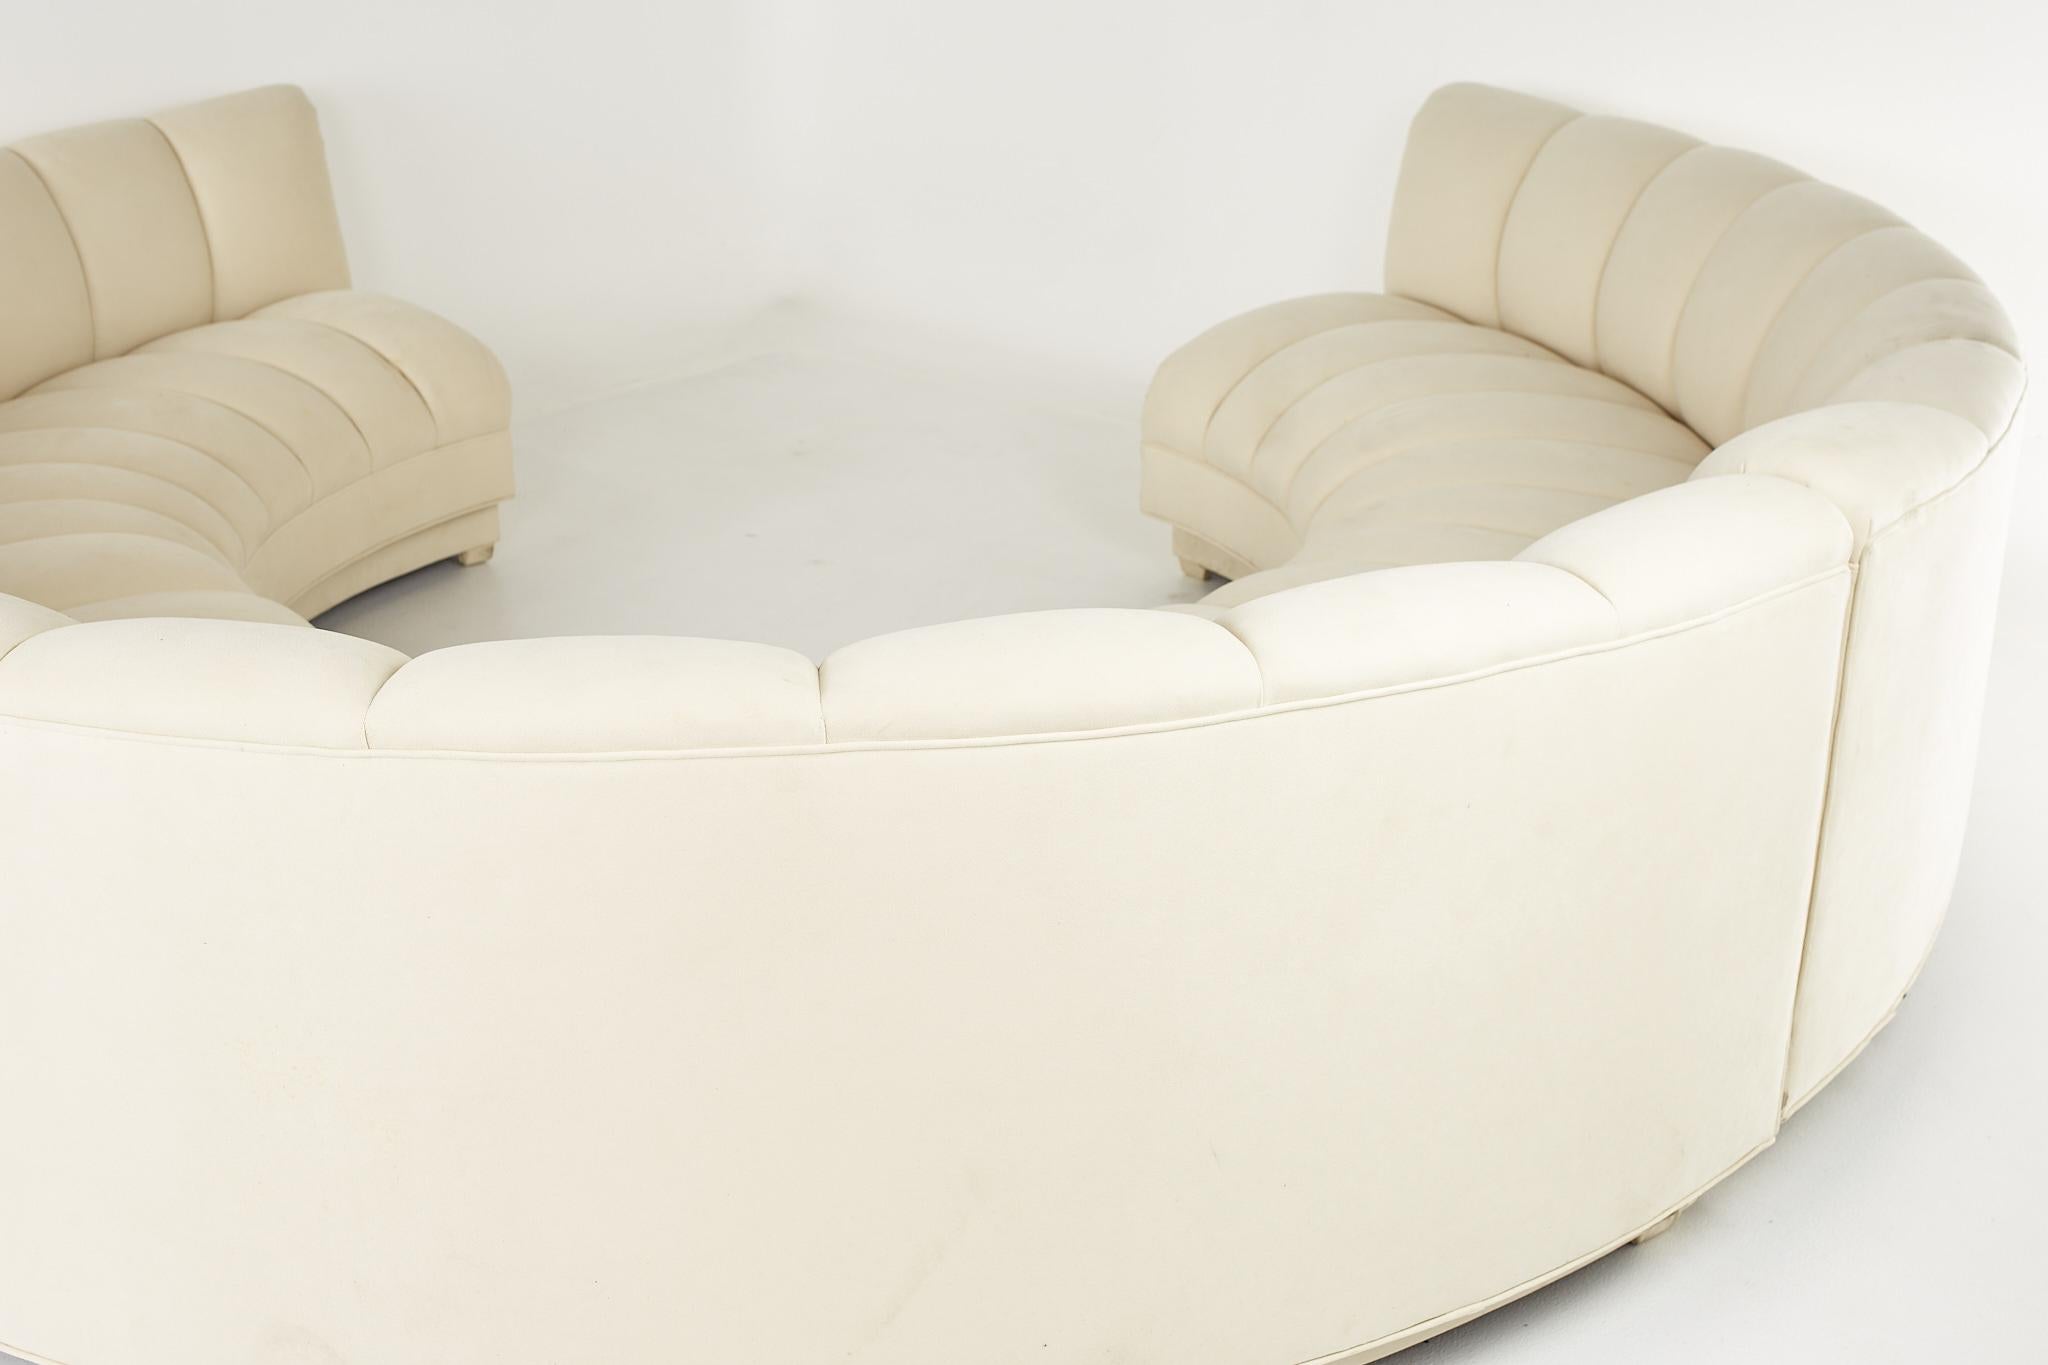 Late 20th Century Steve Chase Style Mid Century Channeled Suede Semi-Circle Three Piece Sofa For Sale